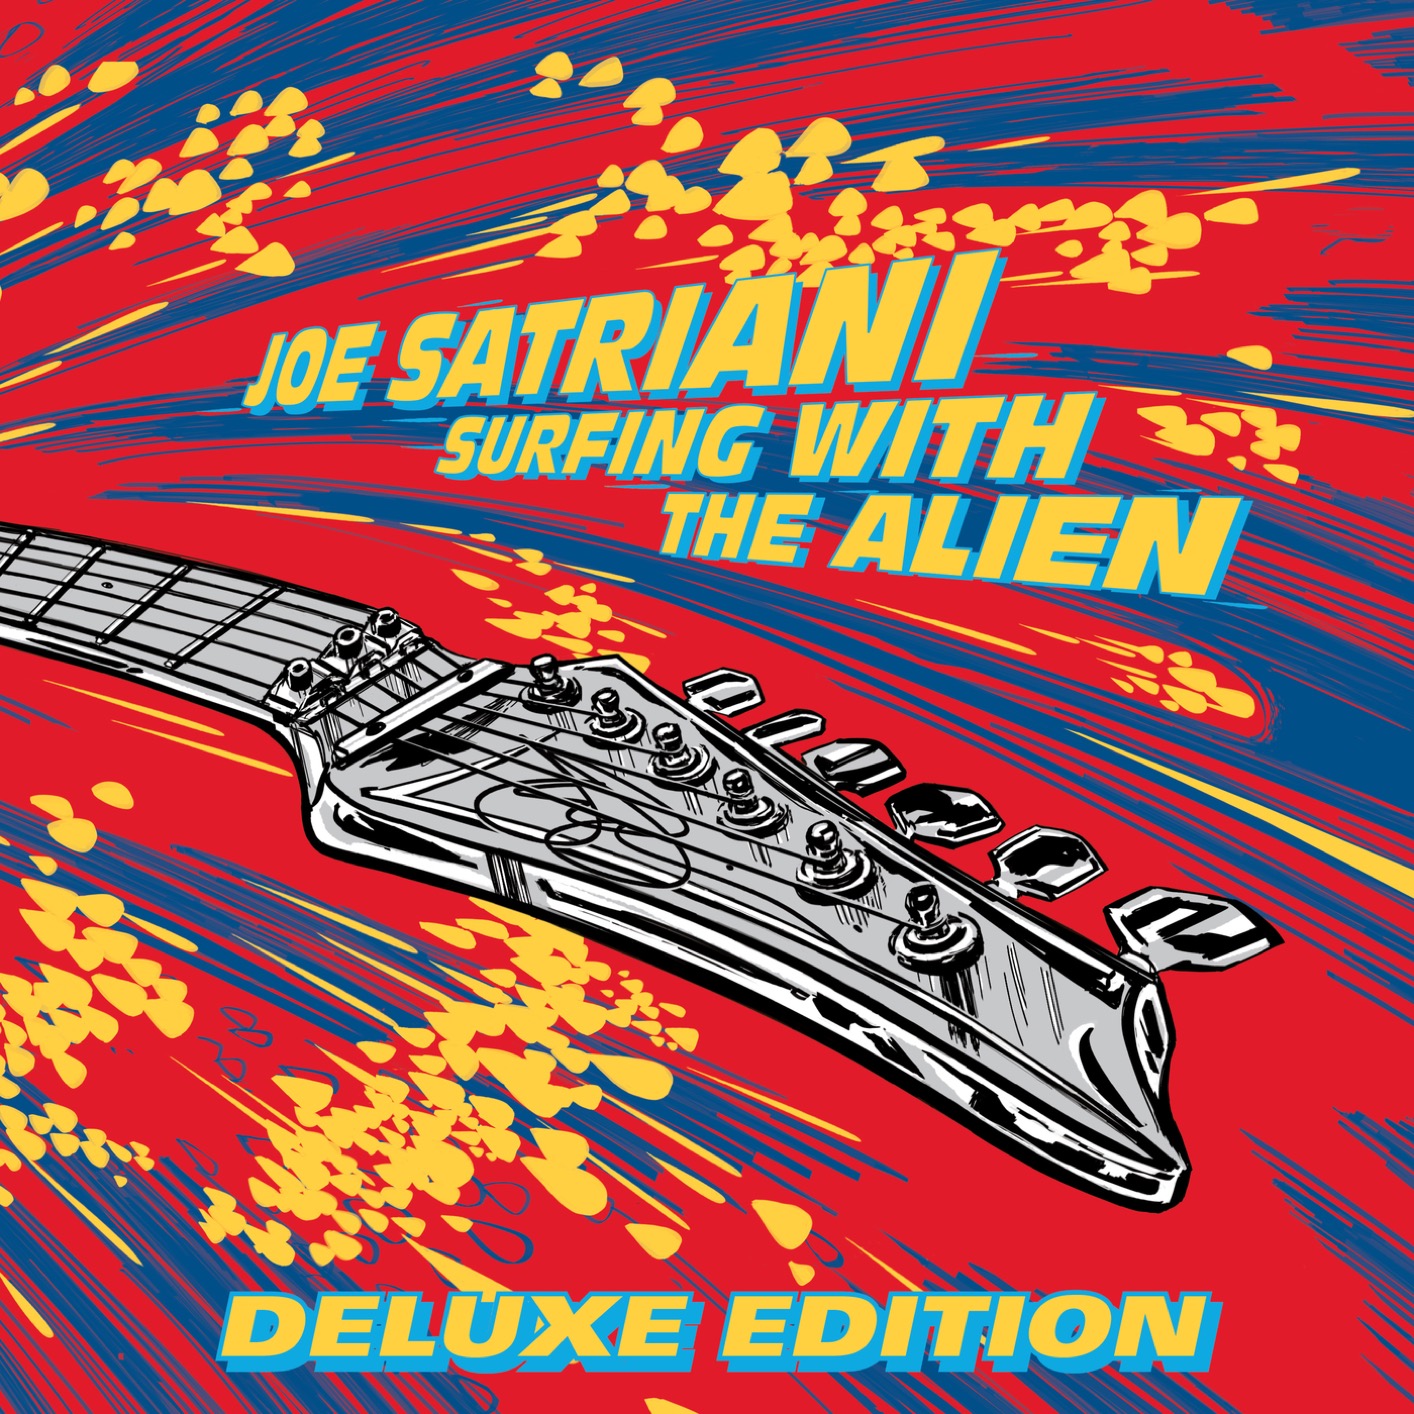 Joe Satriani – Surfing with the Alien (Remastered Deluxe Edition) (1987/2020) [FLAC 24bit/96kHz]